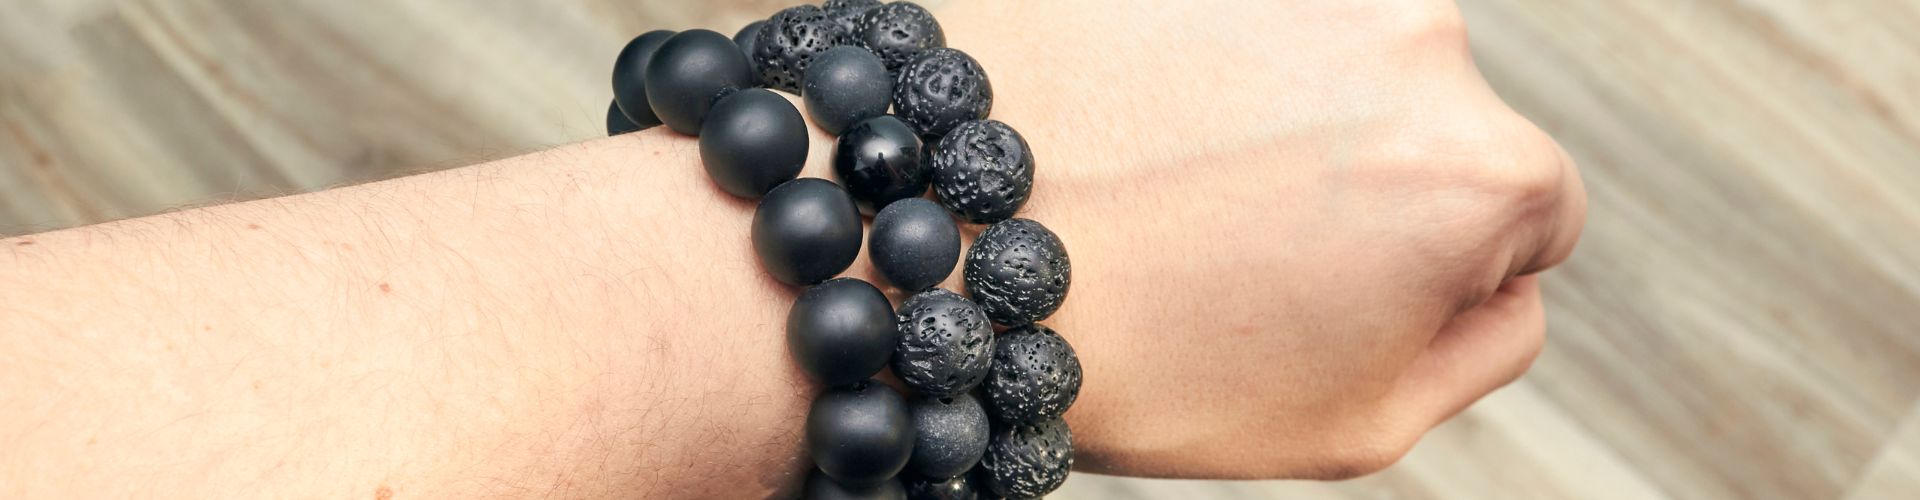 three black shungit lava bracelets on the background of a wooden floor are dressed on a hand⁠